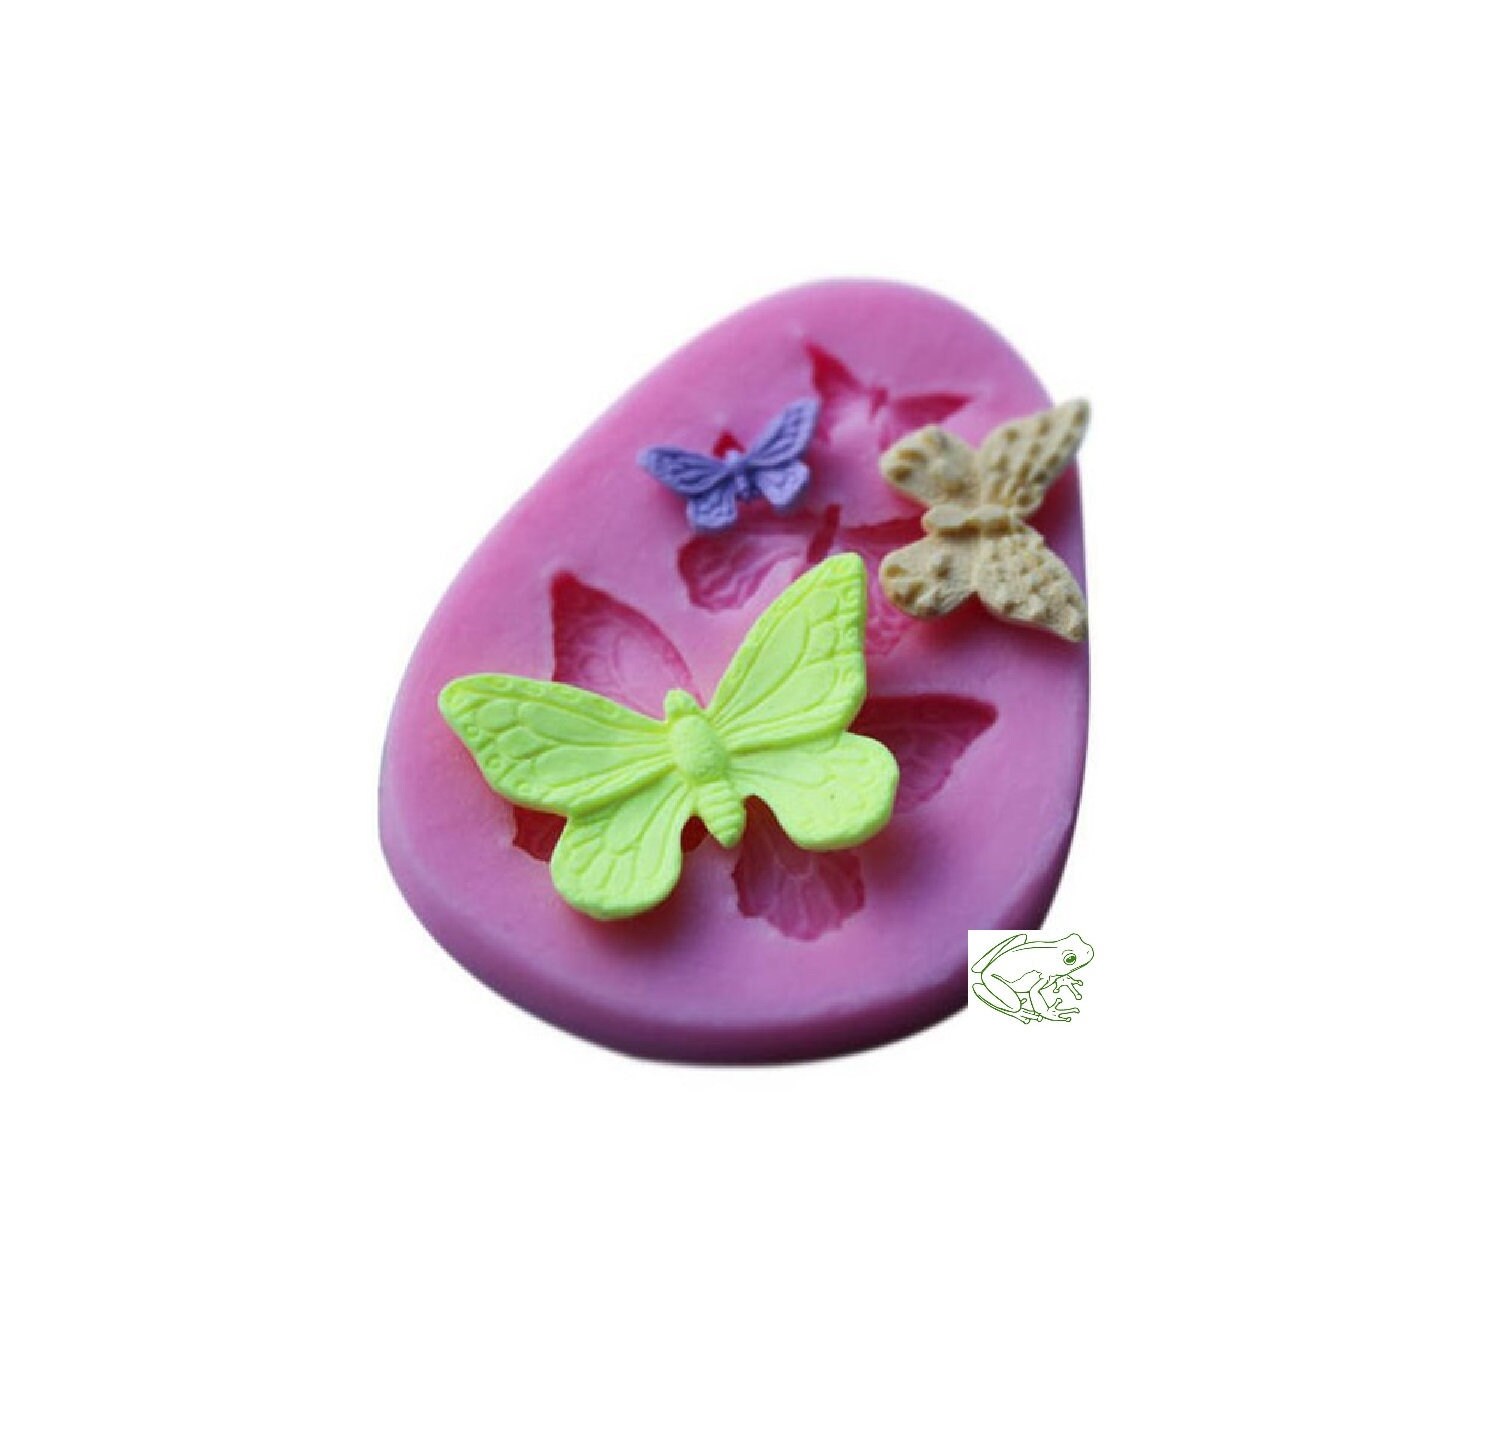  Mujiang Butterfly Silicone Molds Mini Butterfly Fondant Mold  For Chocolate Candy Gum Paste Cupcake Topper Polymer Clay Cake Decorating  Set Of 4 : Home & Kitchen